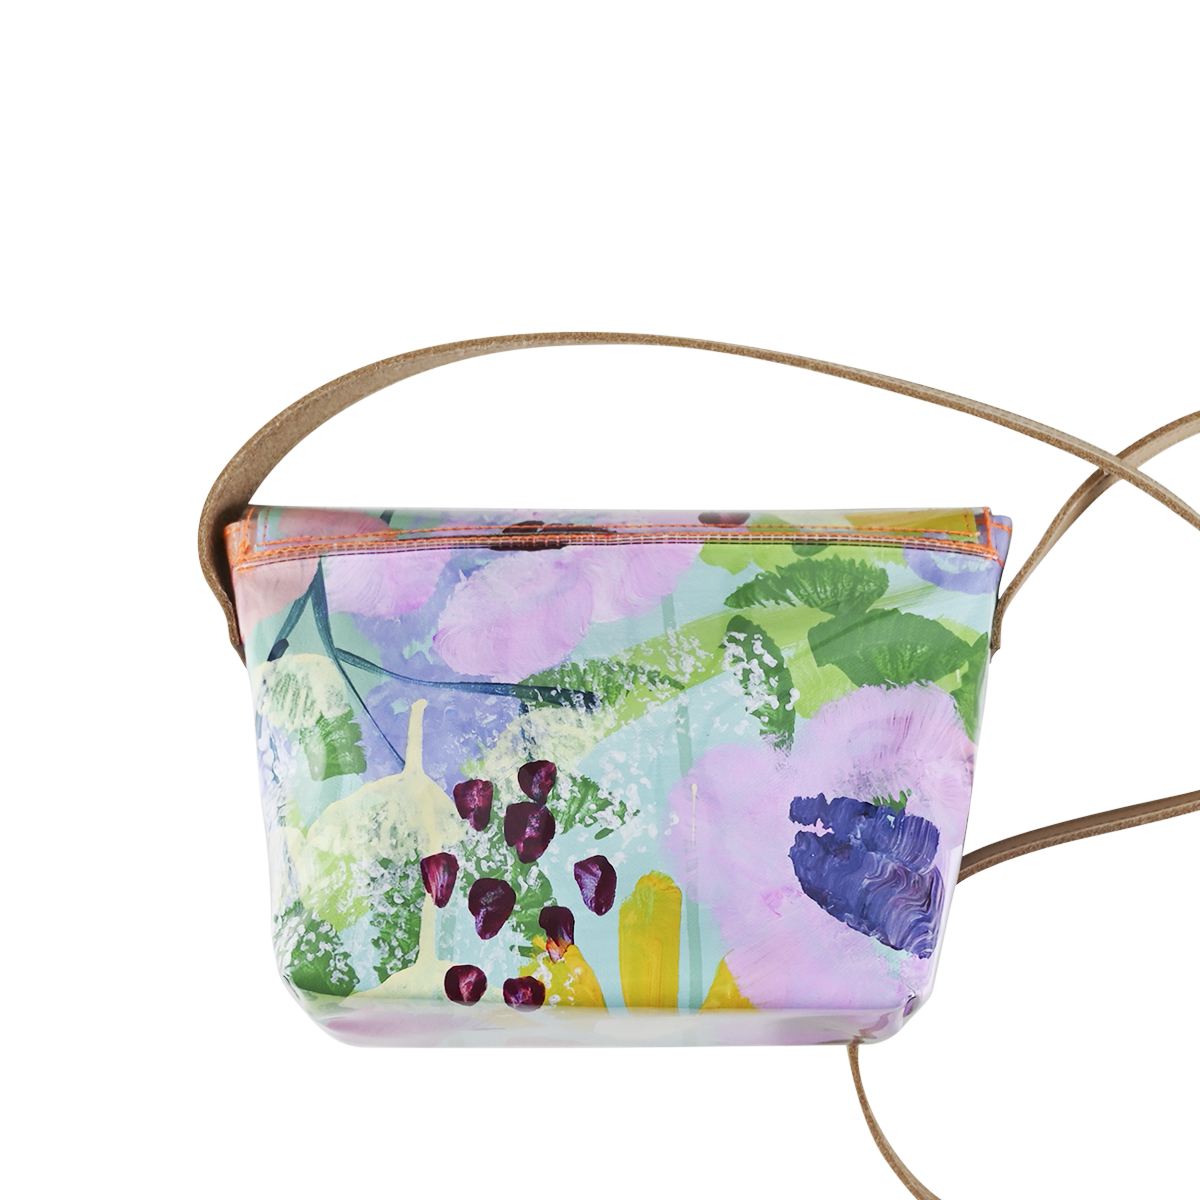 romanticise your life | crossbody day bag - Tiff Manuell